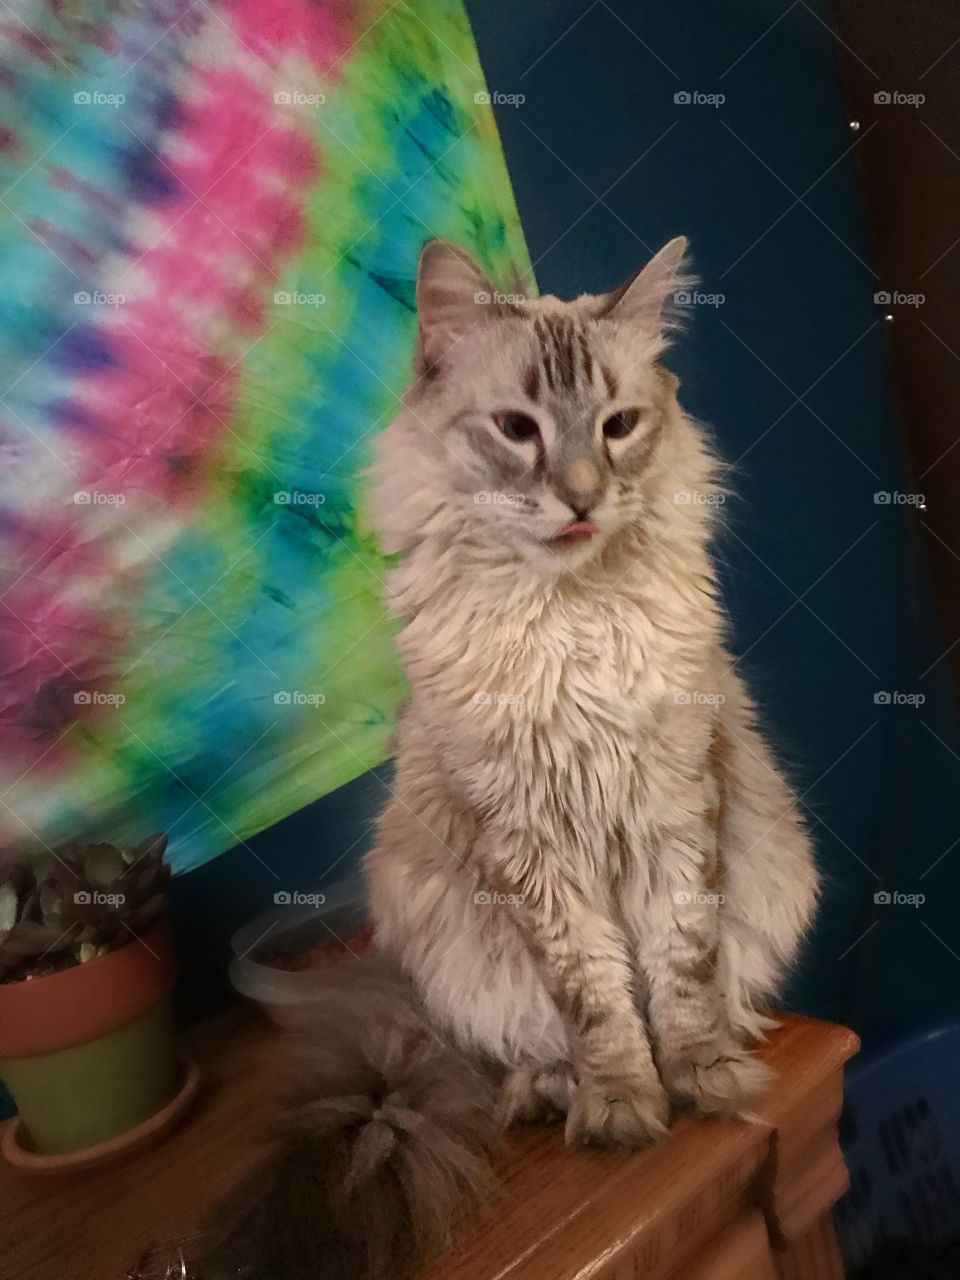 Tongue out cat